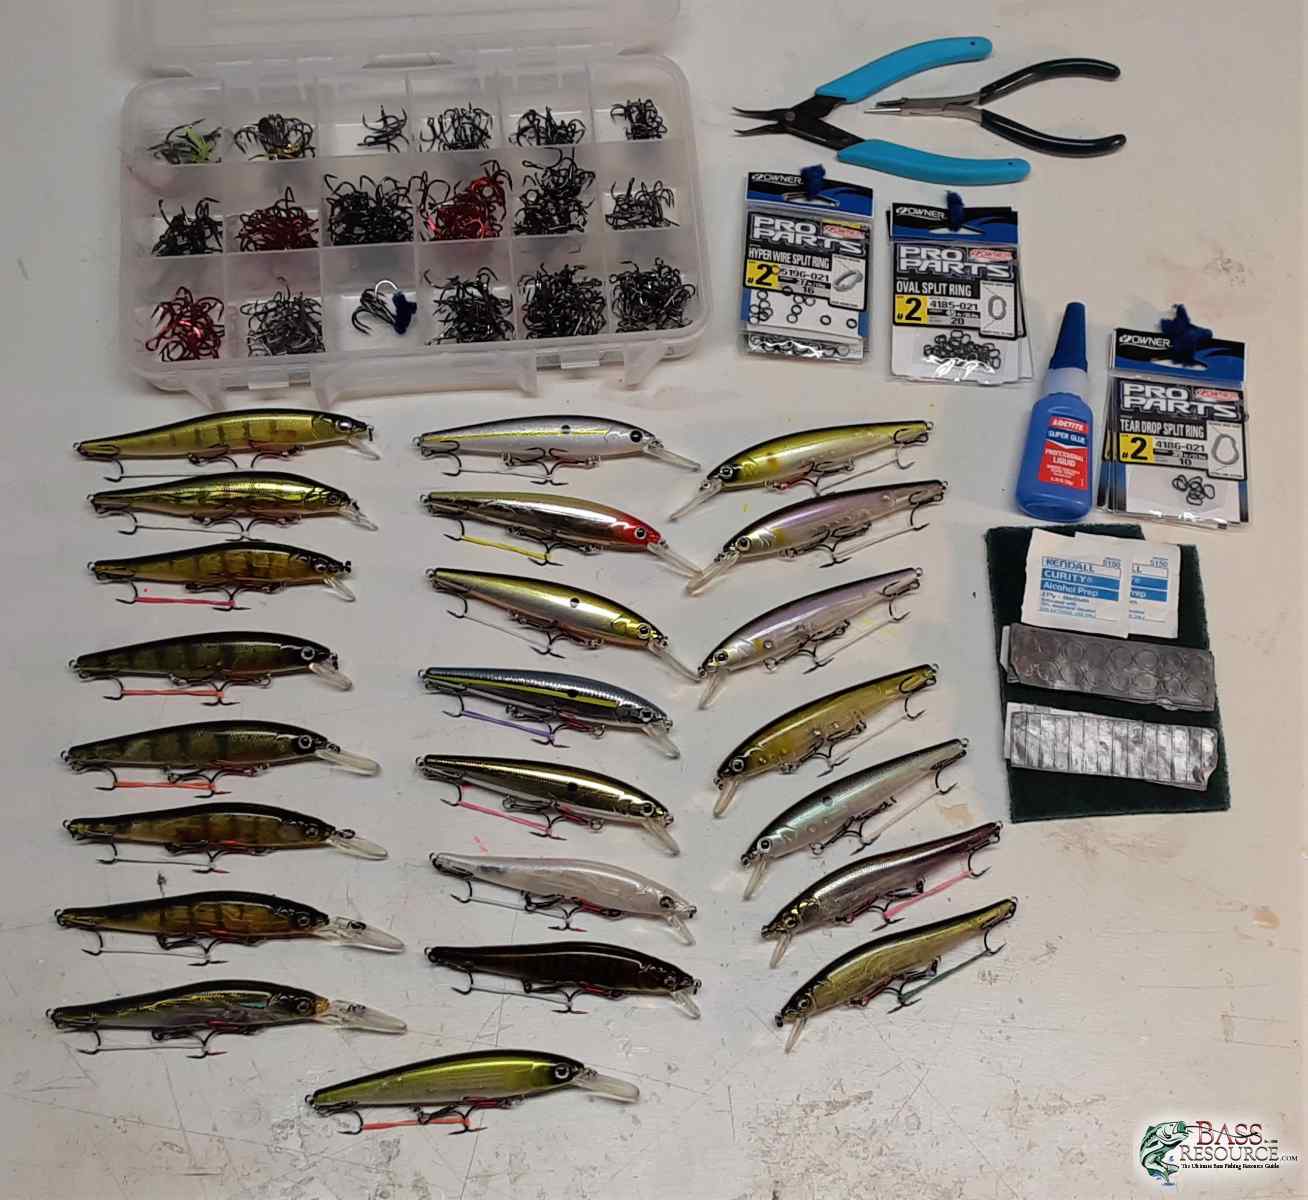 Sinking Jerkbaits That Float - Fishing Tackle - Bass Fishing Forums